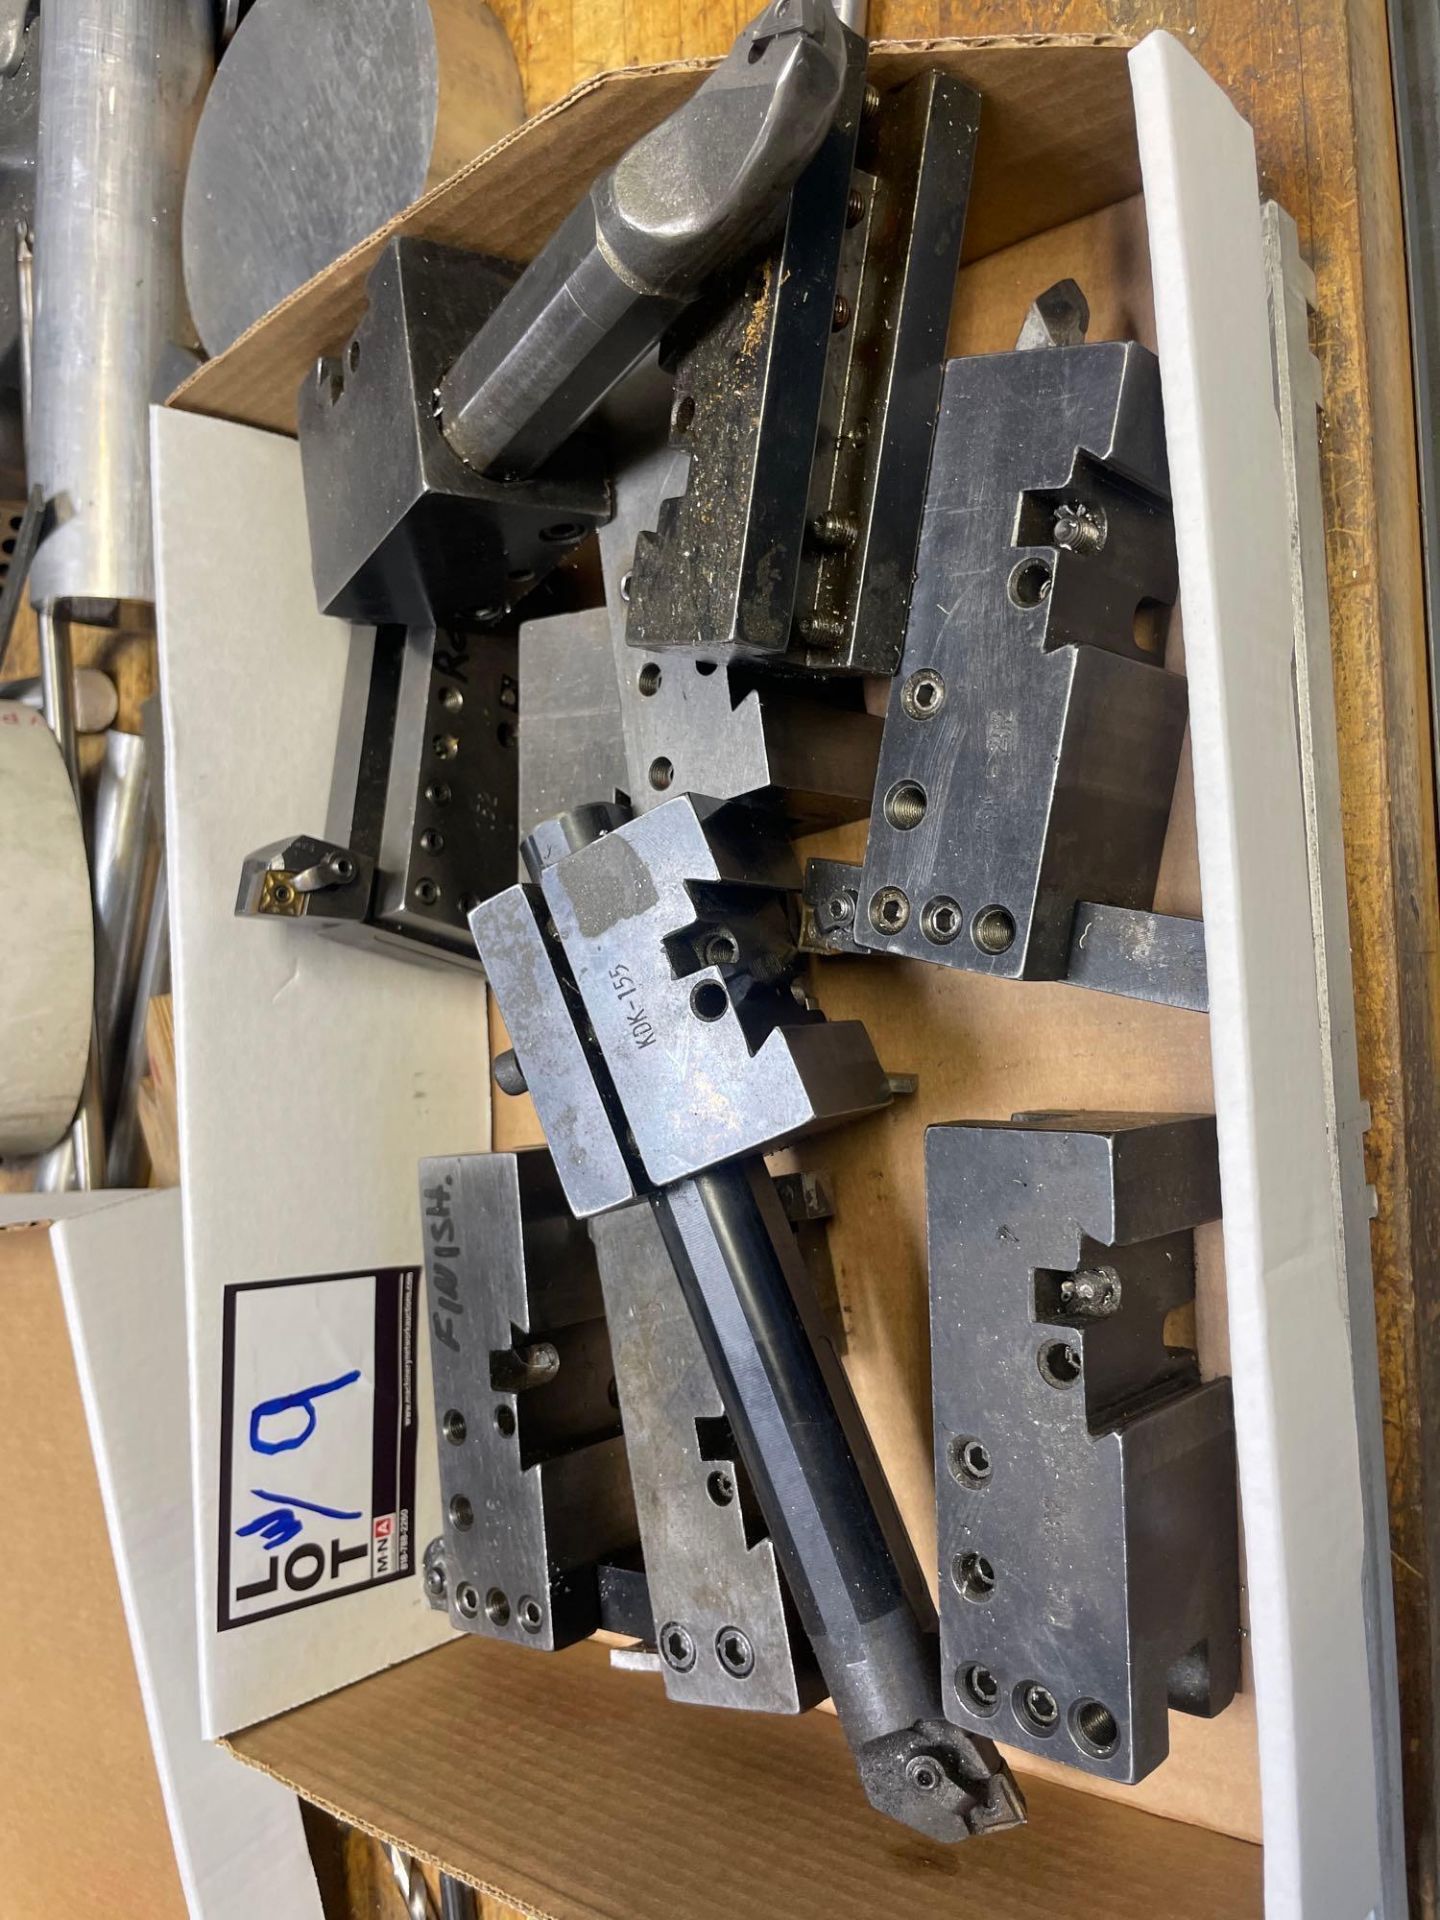 KDK Master Tool Post with Holders - Image 4 of 5